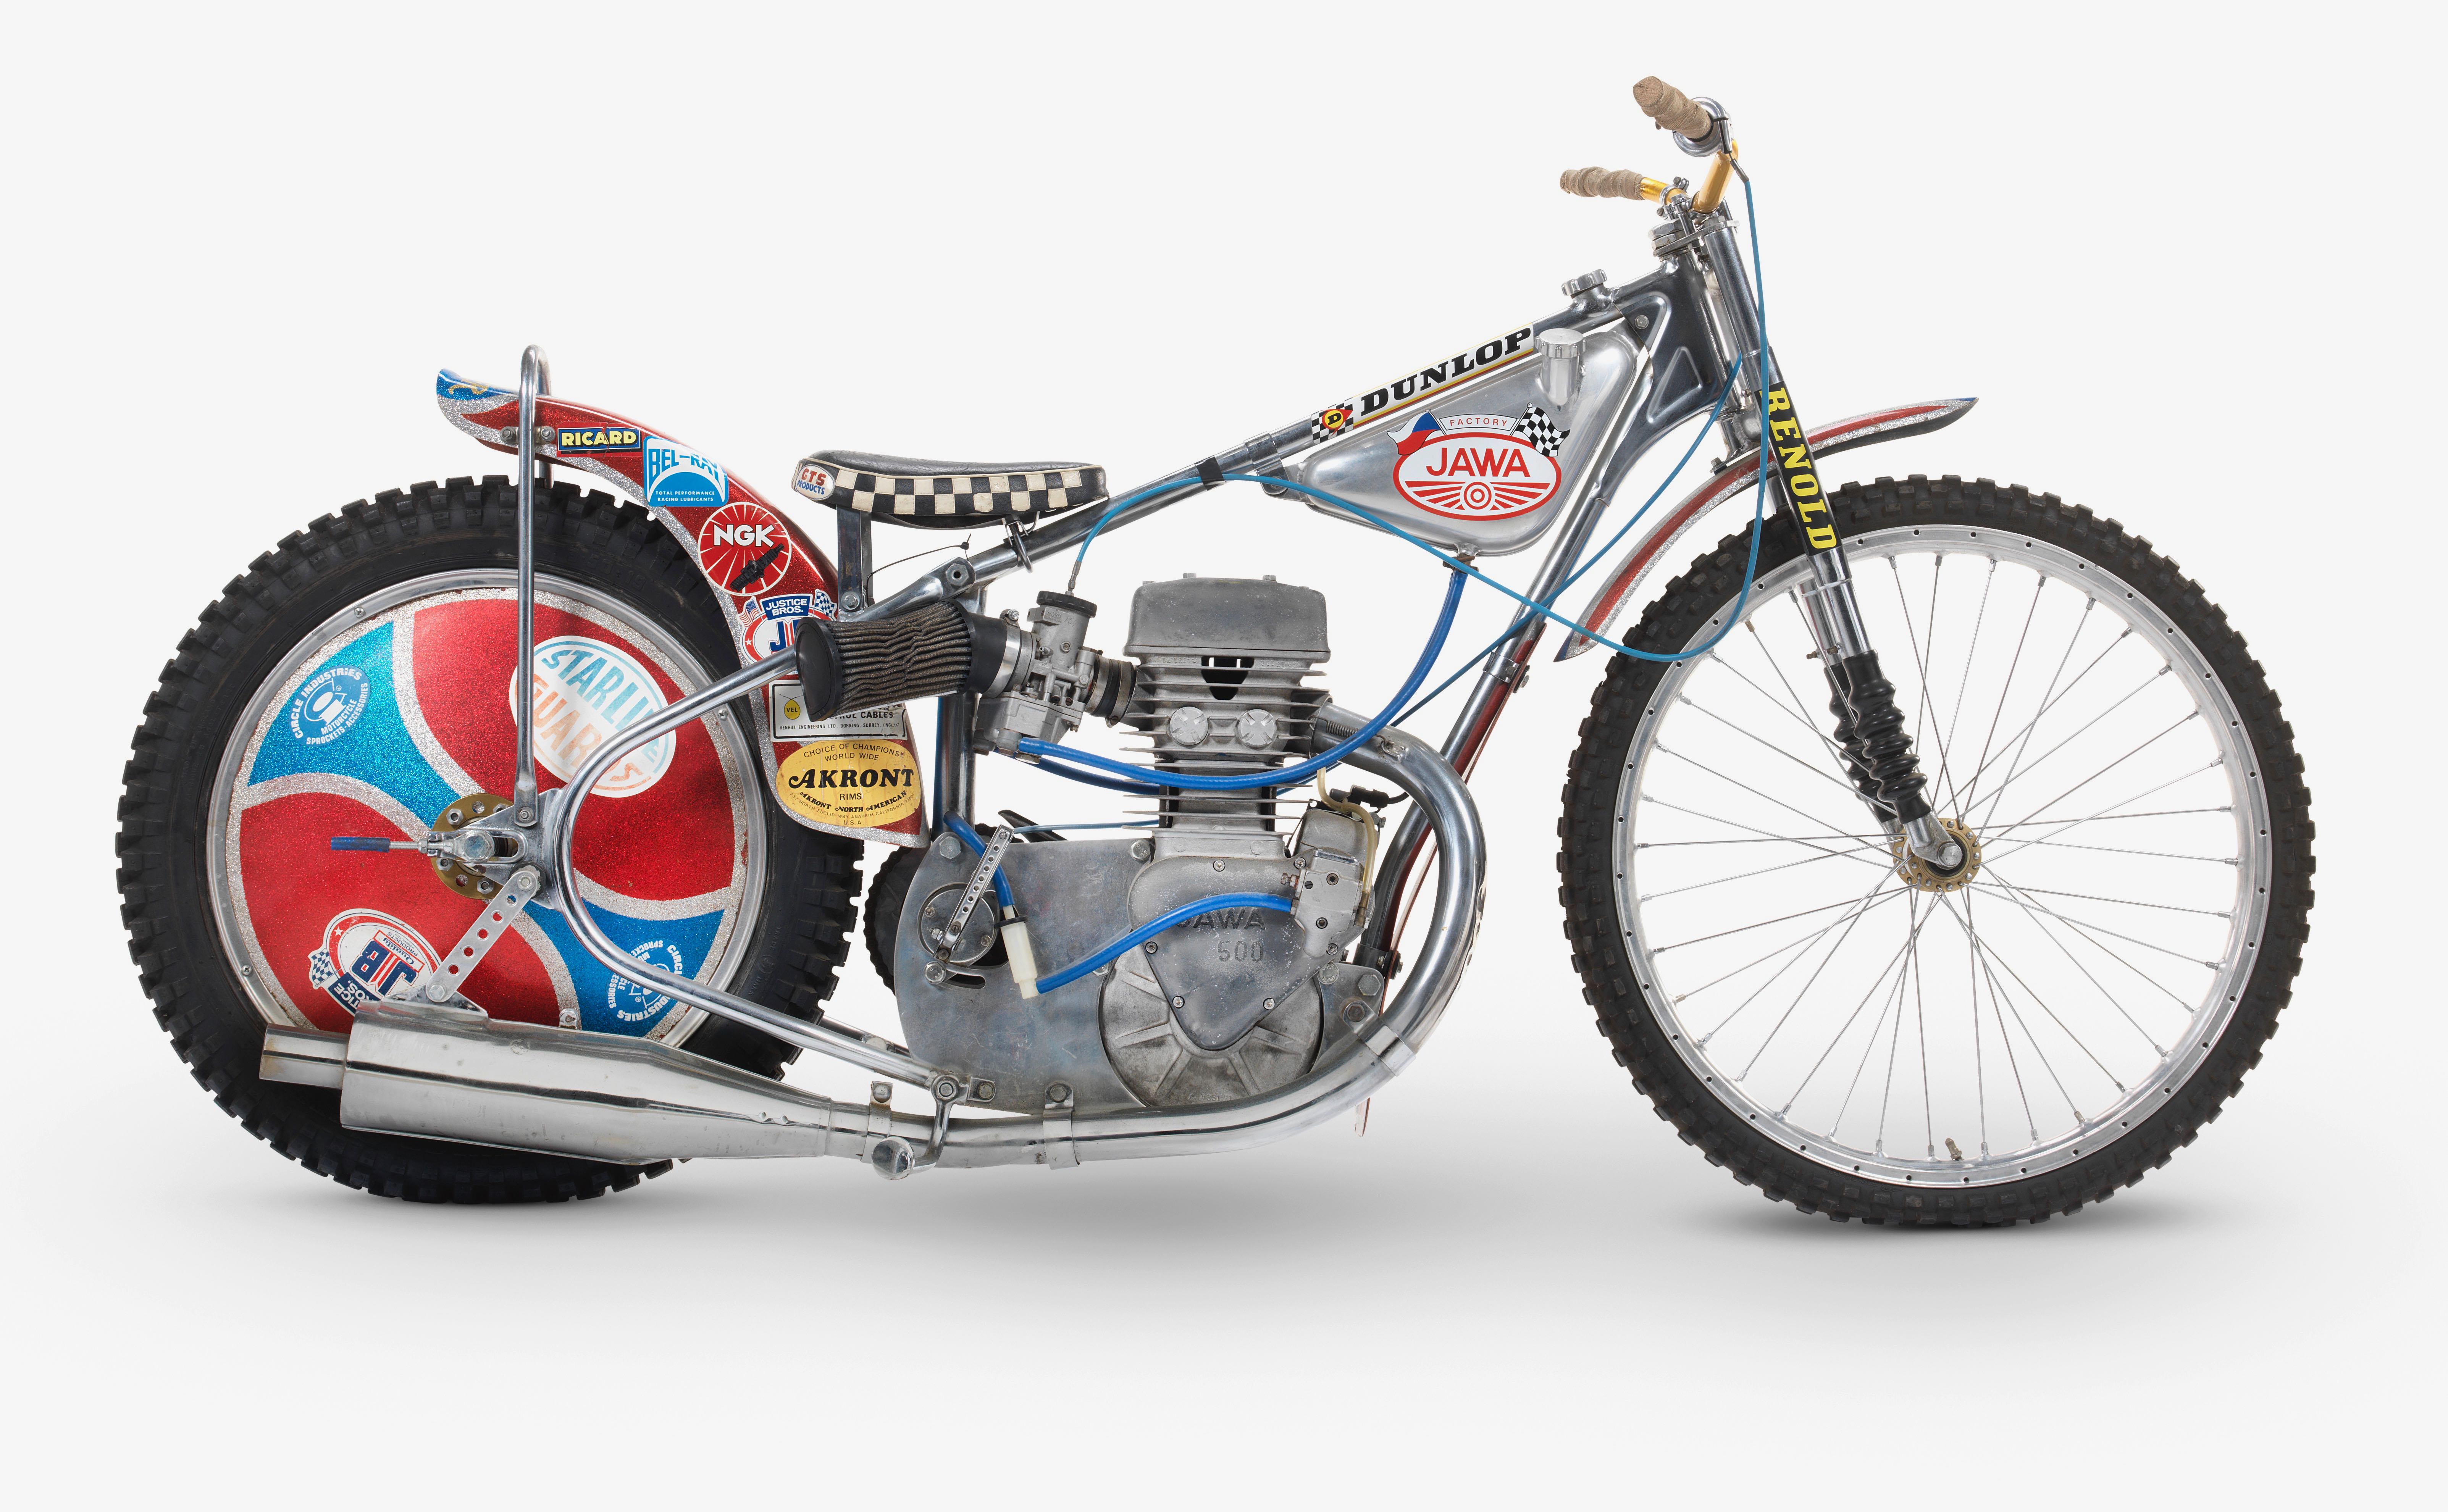 Ivan Mauger's 1977 championship ride will be offered at auction | Bonhams photos